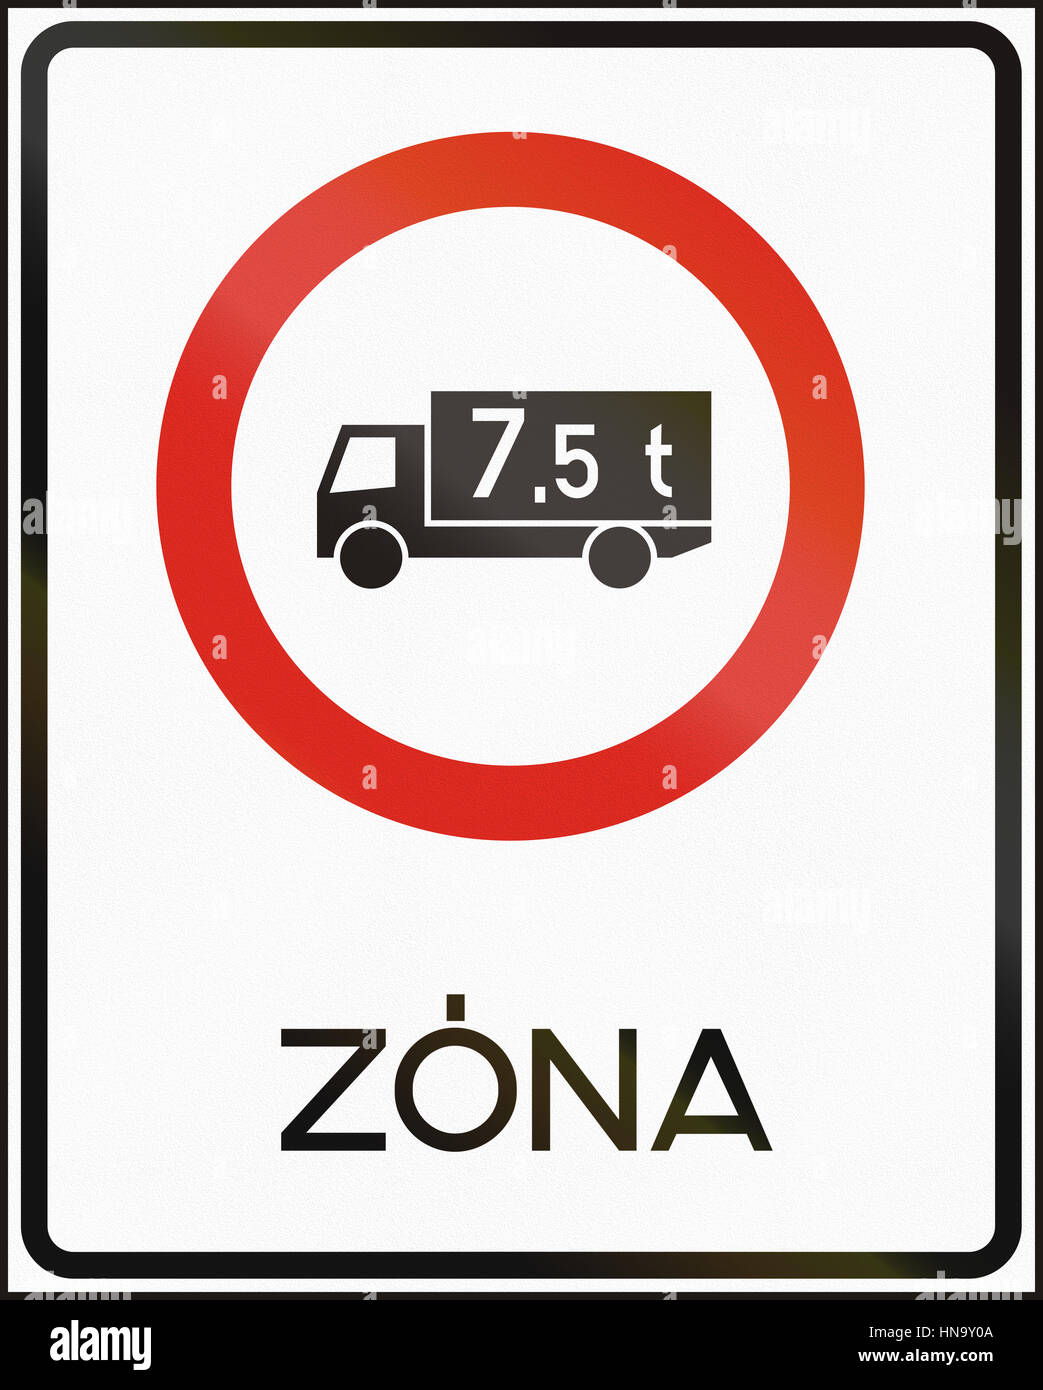 Road sign used in Hungary - No lorries weighing more than 7,5 tons - zone. Stock Photo